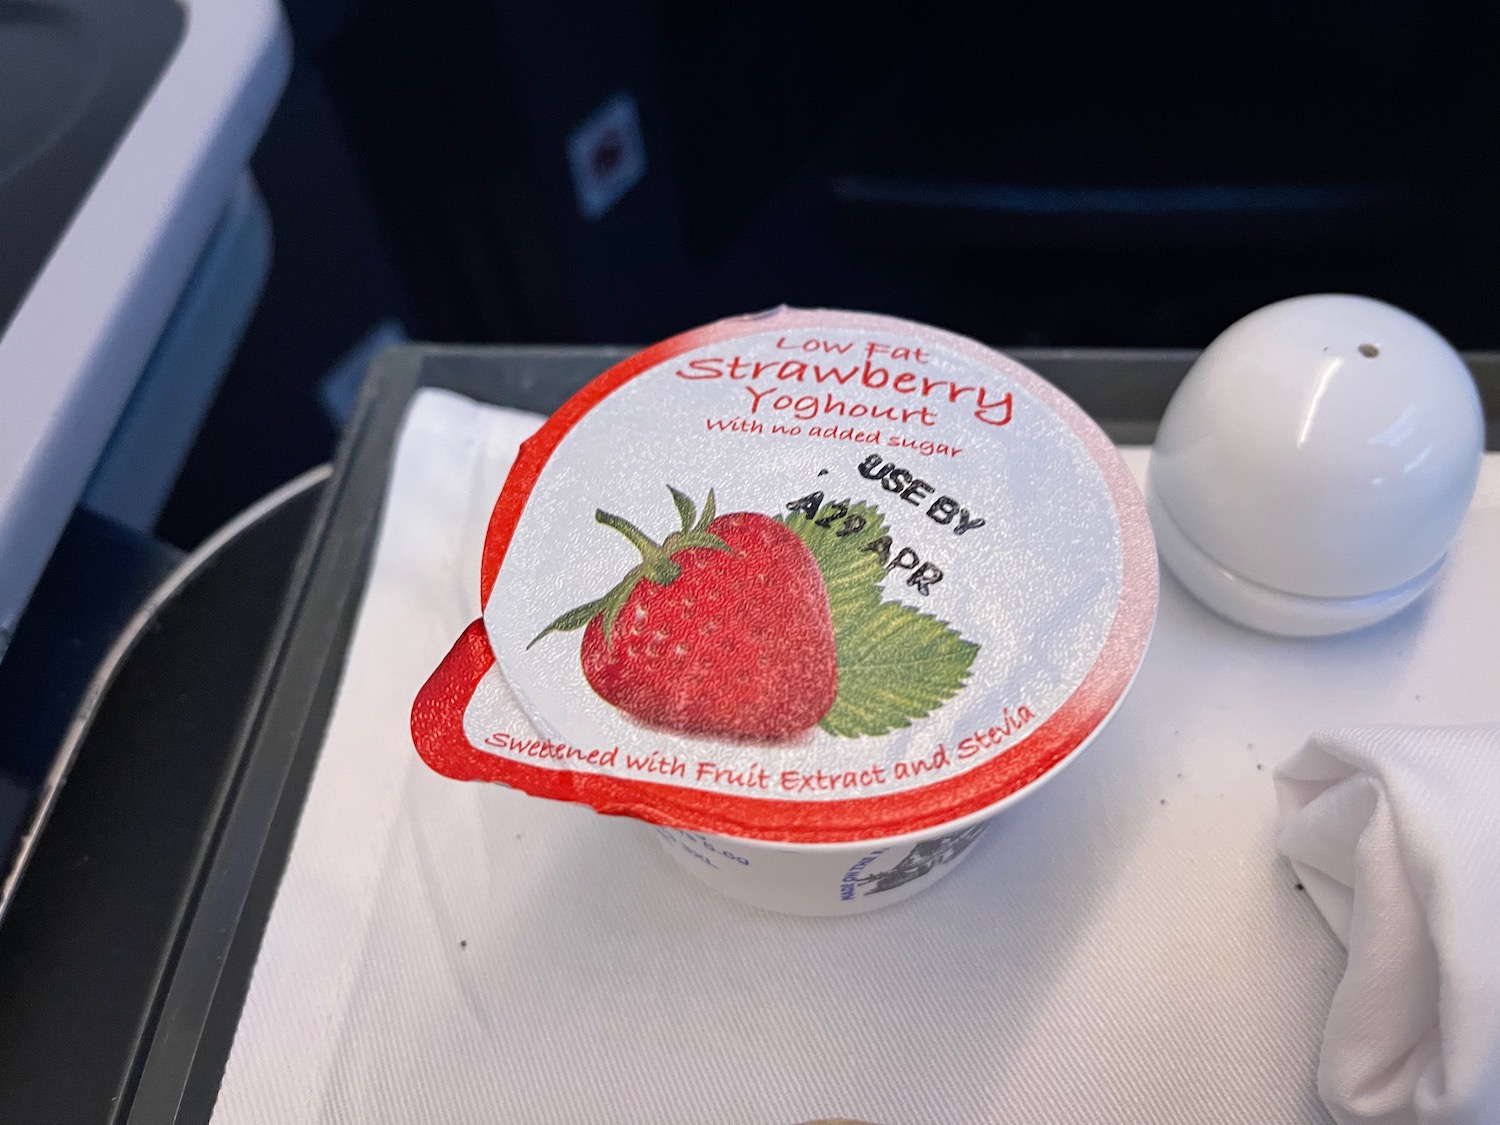 a container of yogurt on a tray